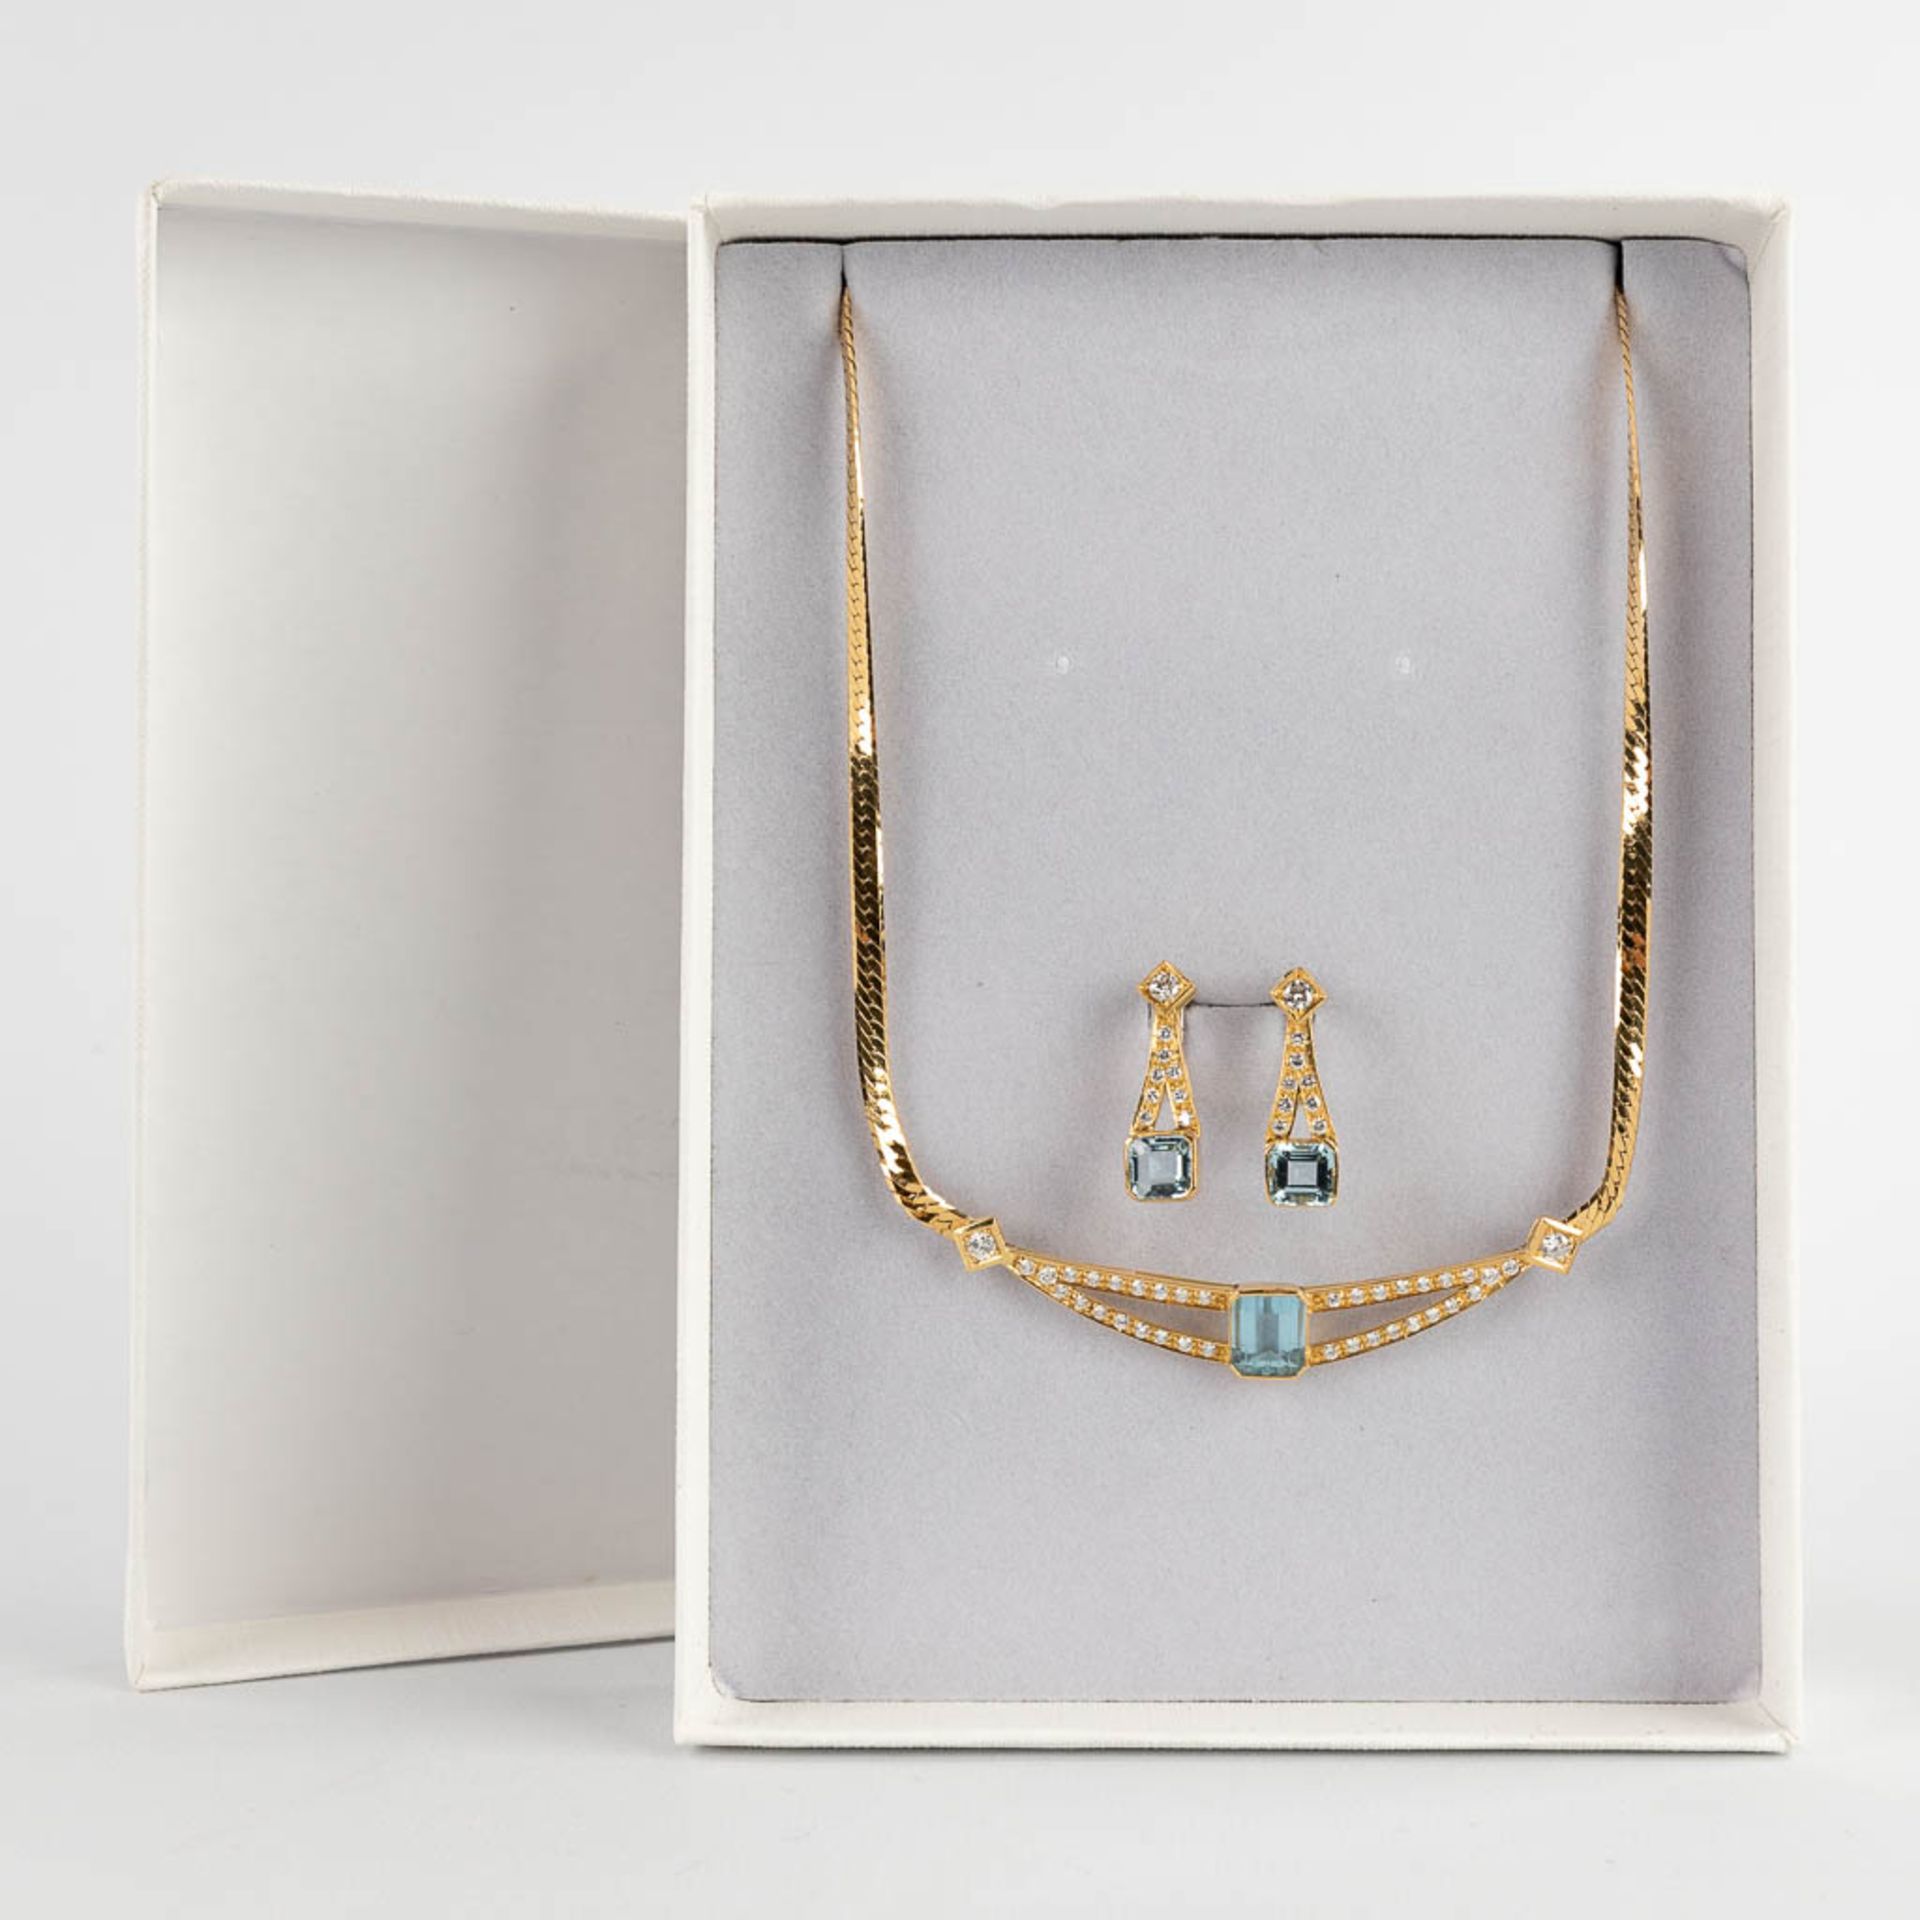 A necklace with two earrings, 18kt yellow gold Brilliants and Topaz/Aquamarine, 26,77g. - Image 3 of 15